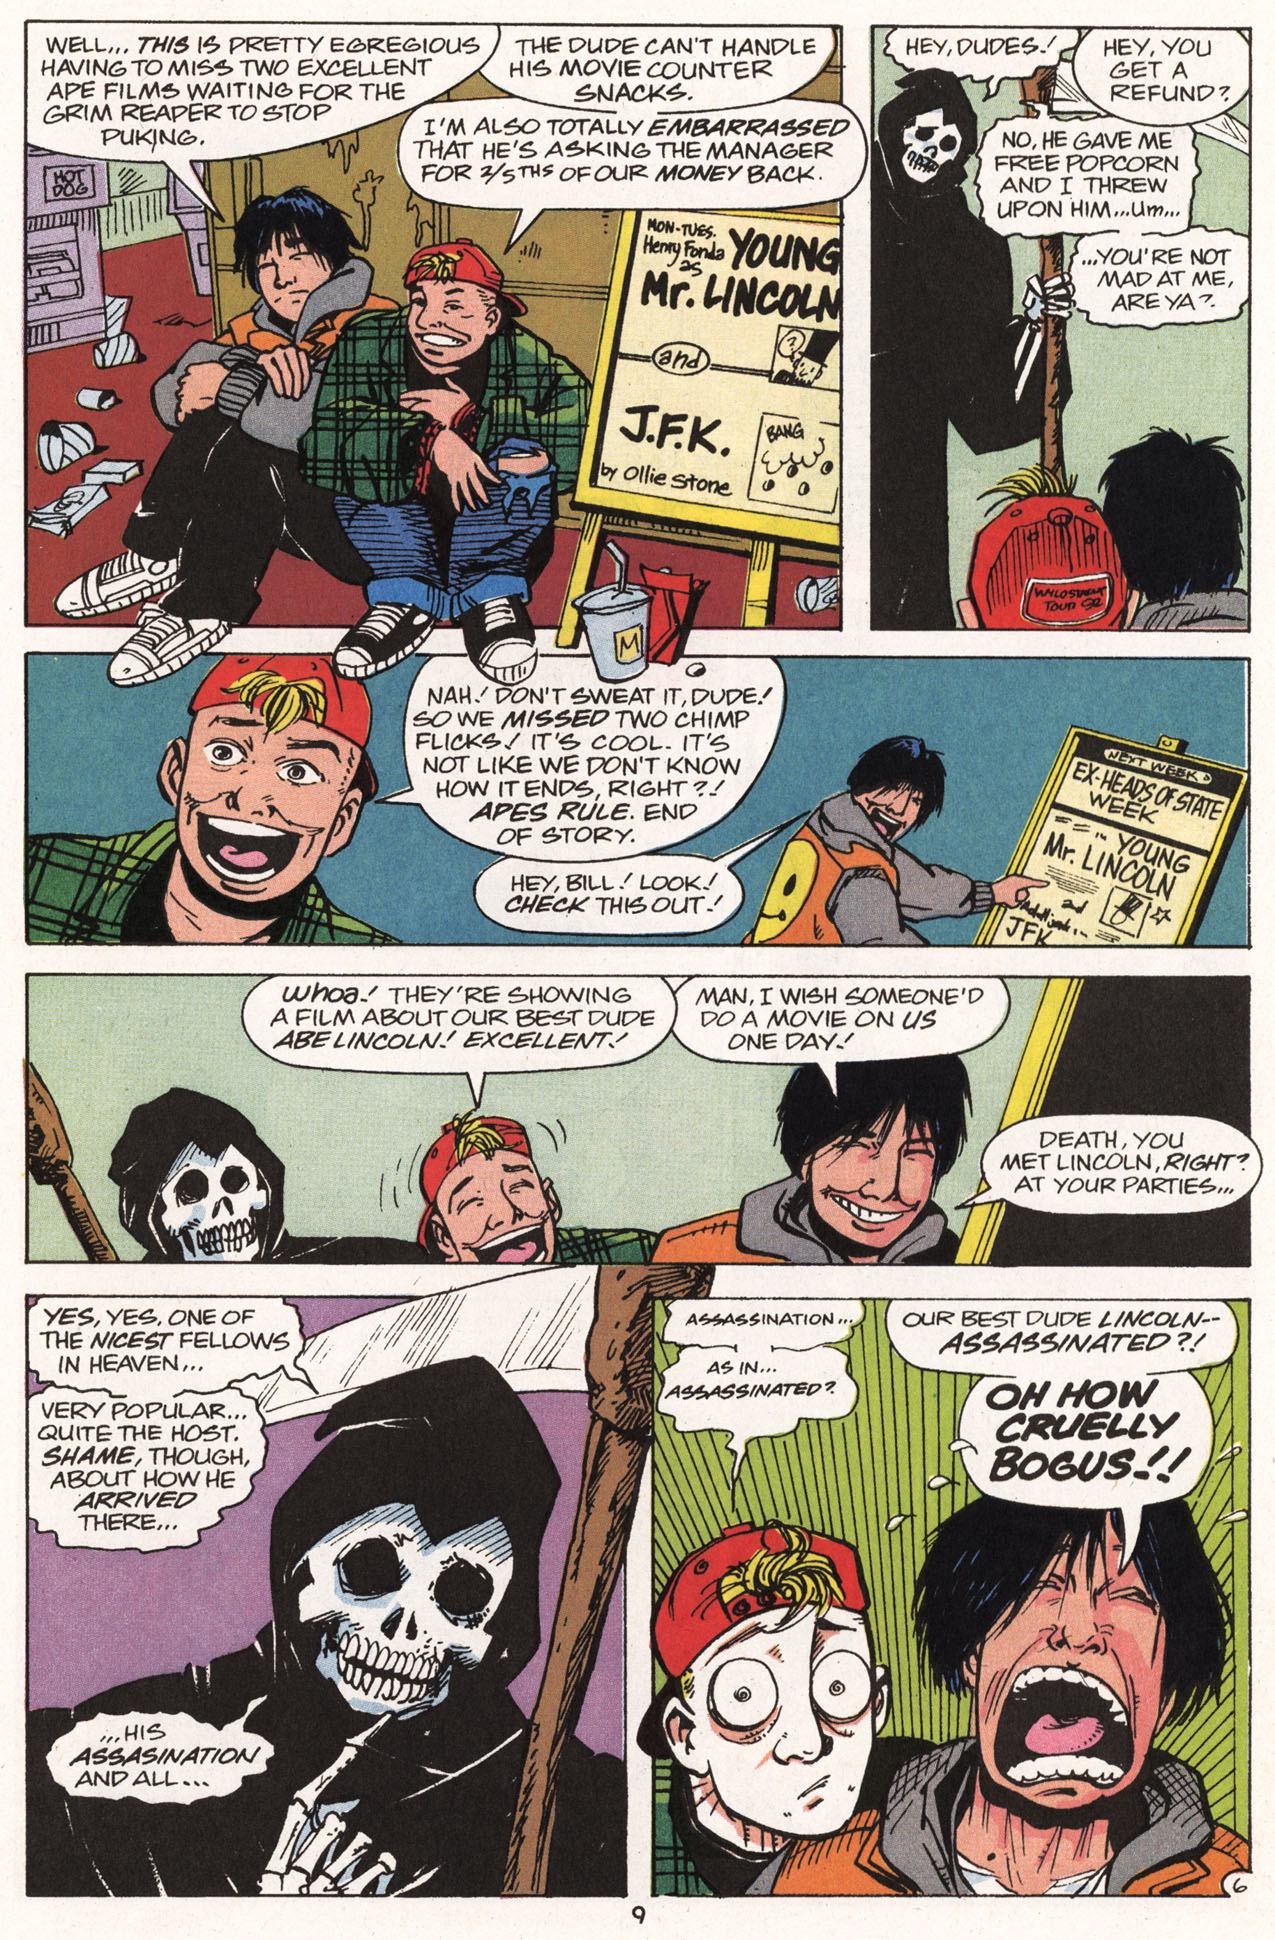 Read online Bill & Ted's Excellent Comic Book comic -  Issue #11 - 9